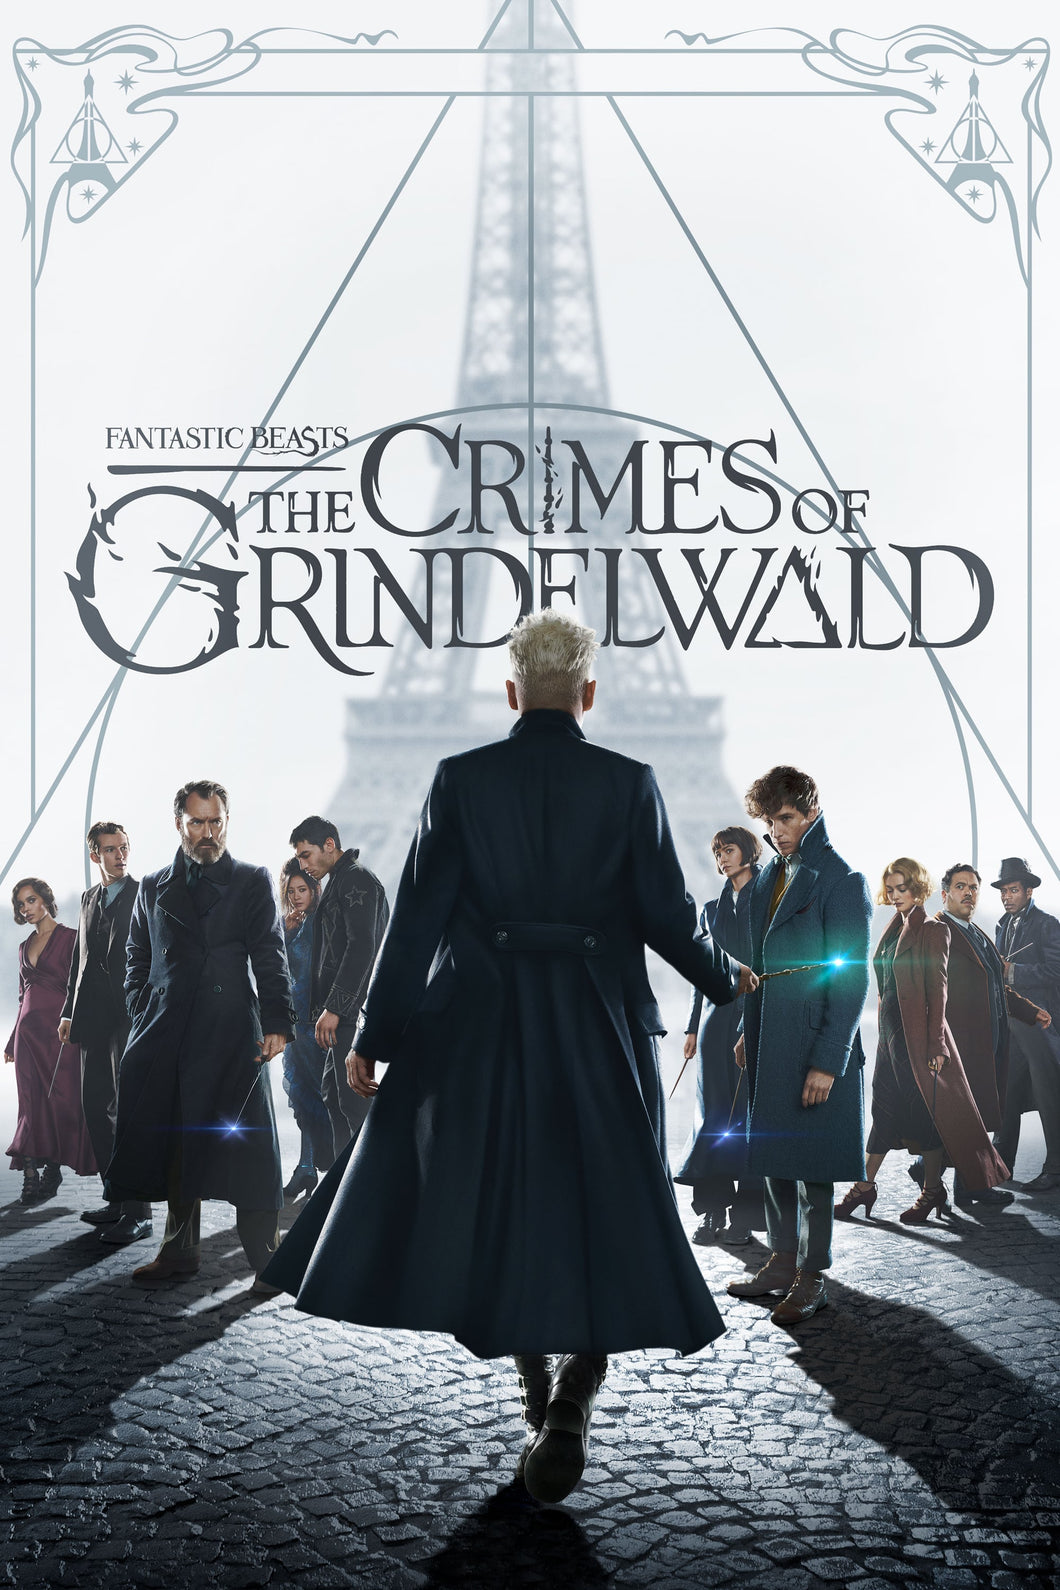 Fantastic Beasts The Crimes Of Grindelwald Movie Poster Framed or Unframed Glossy Poster Free UK Shipping!!!